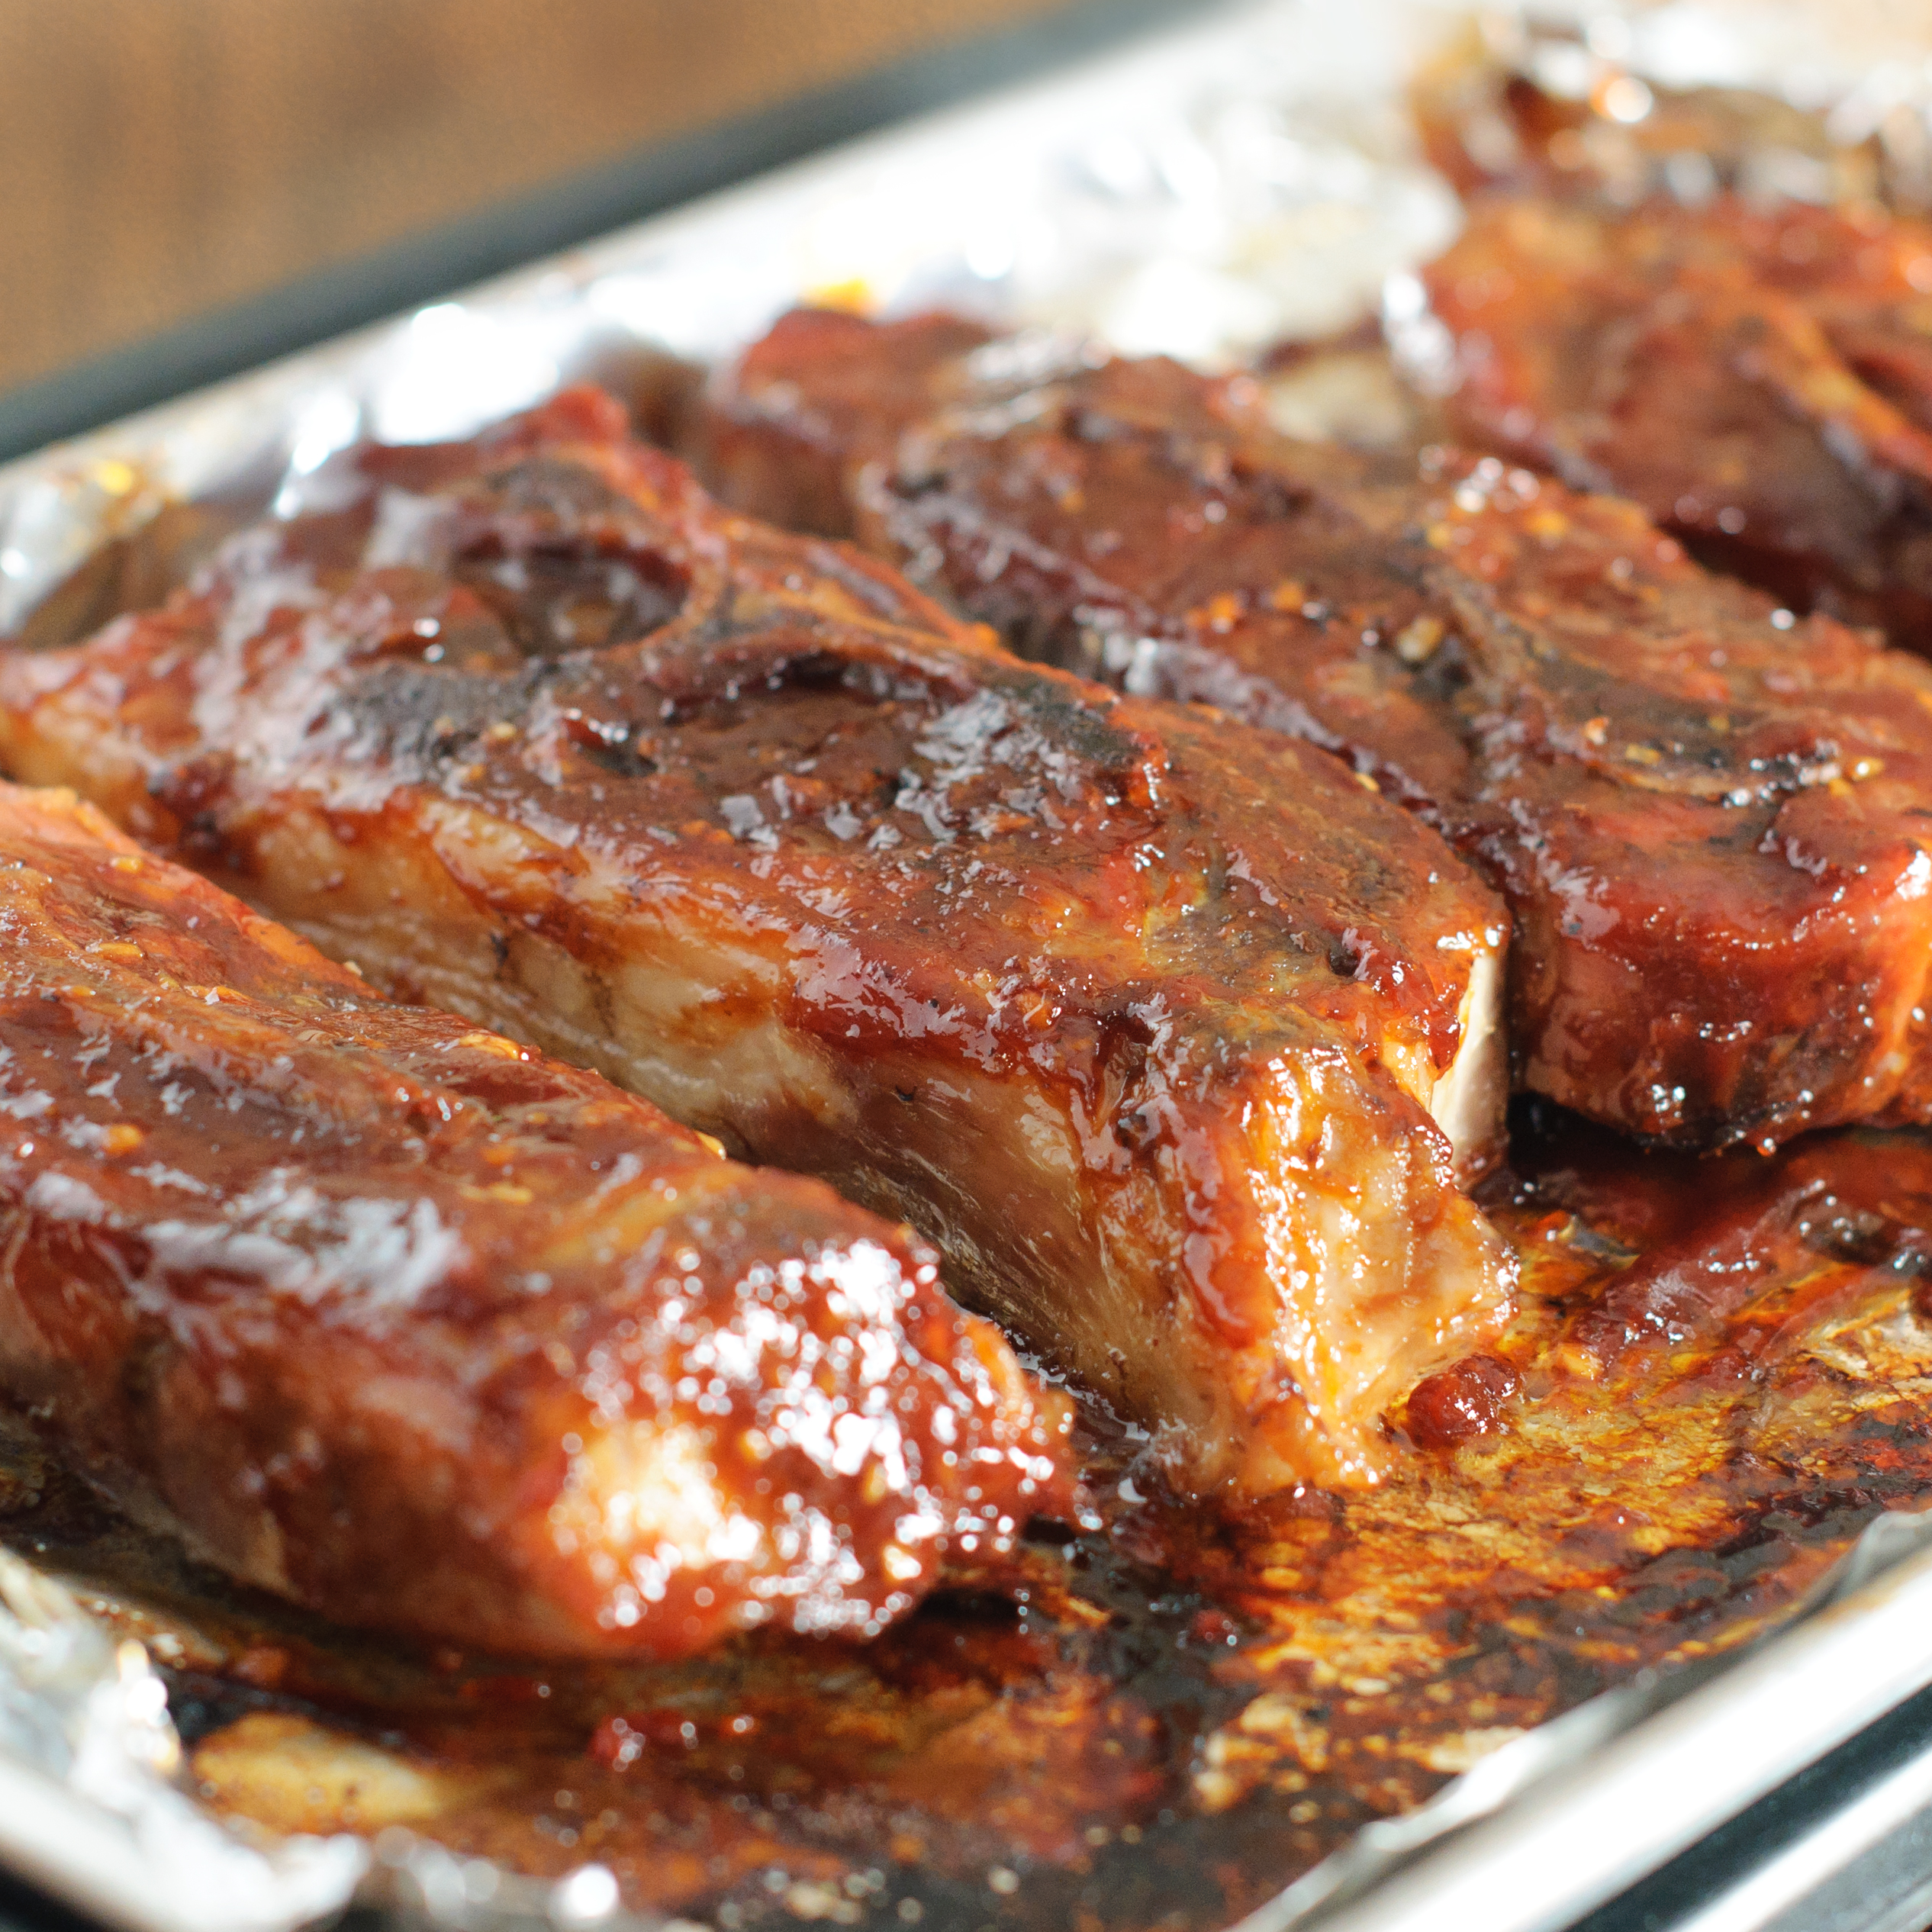 Bbq Country Style Ribs Recipe Allrecipes,What Is Baking Powder